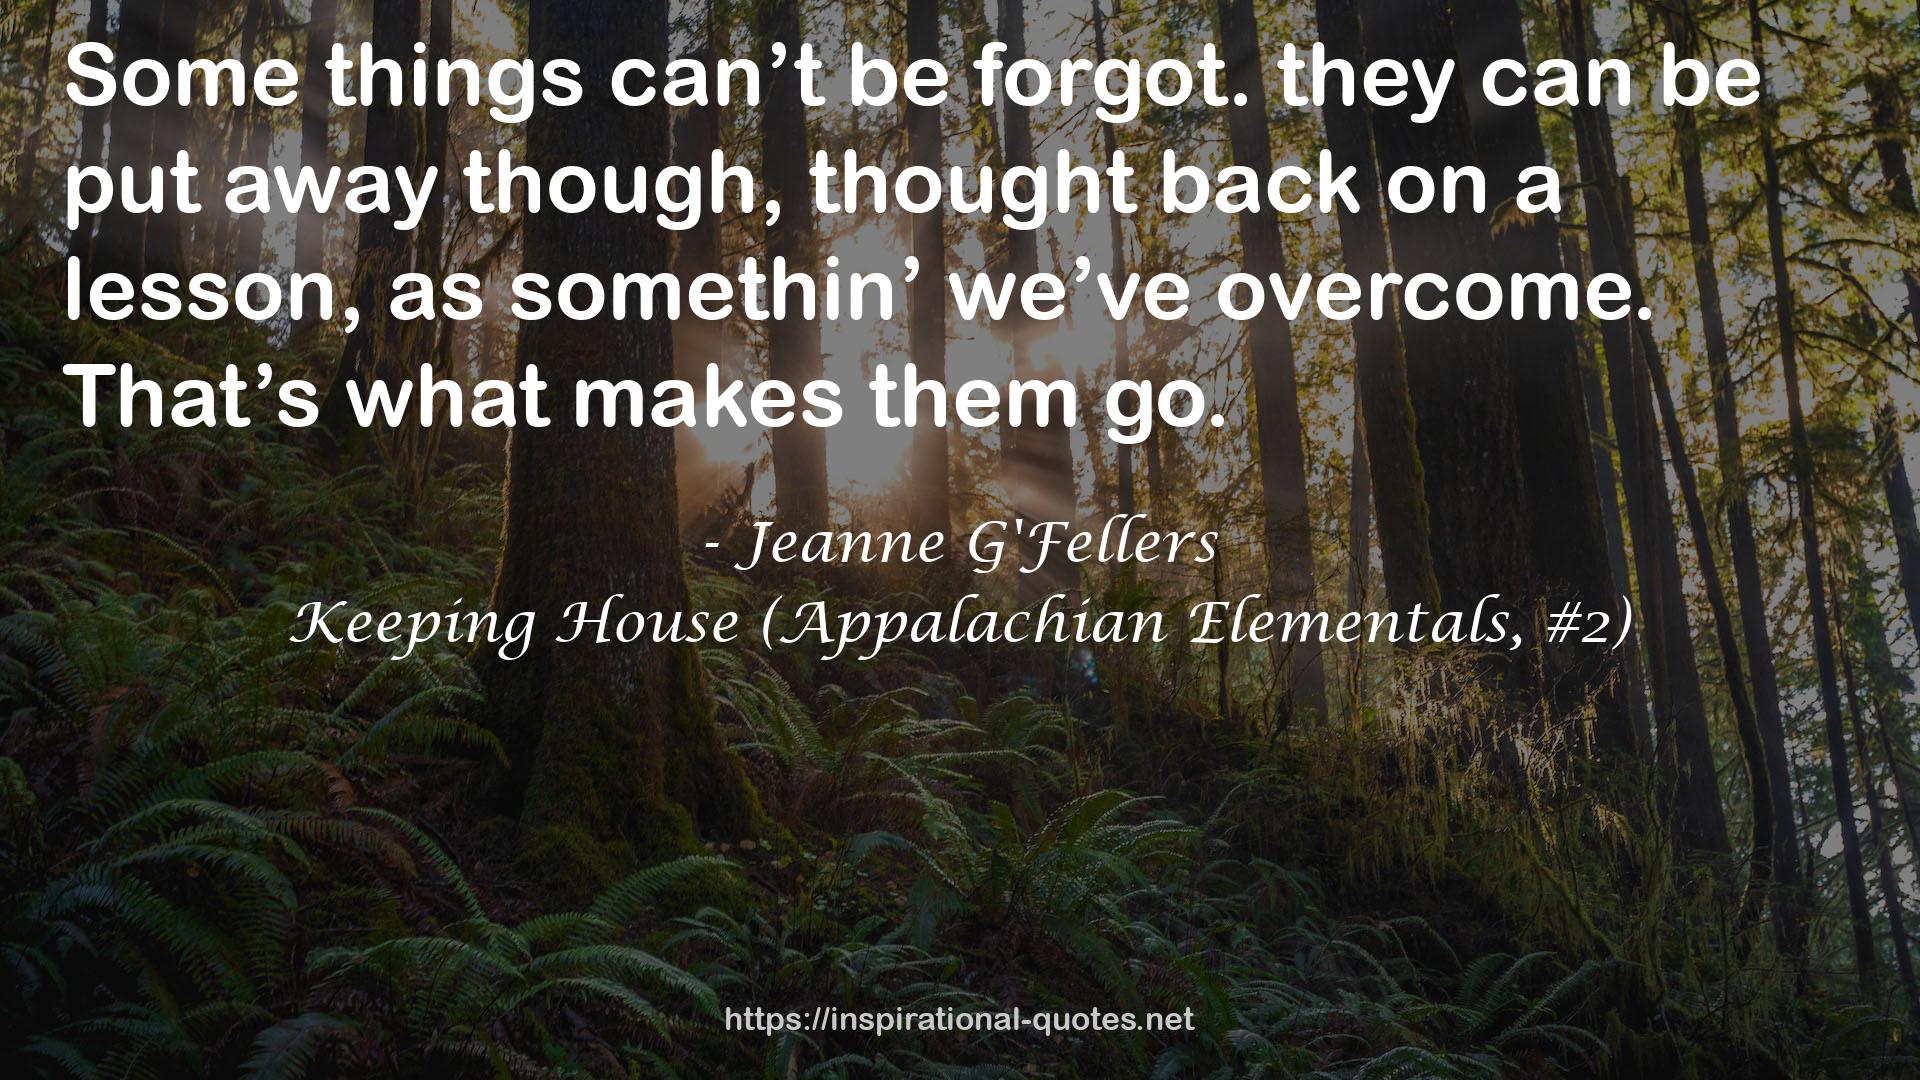 Jeanne G'Fellers QUOTES